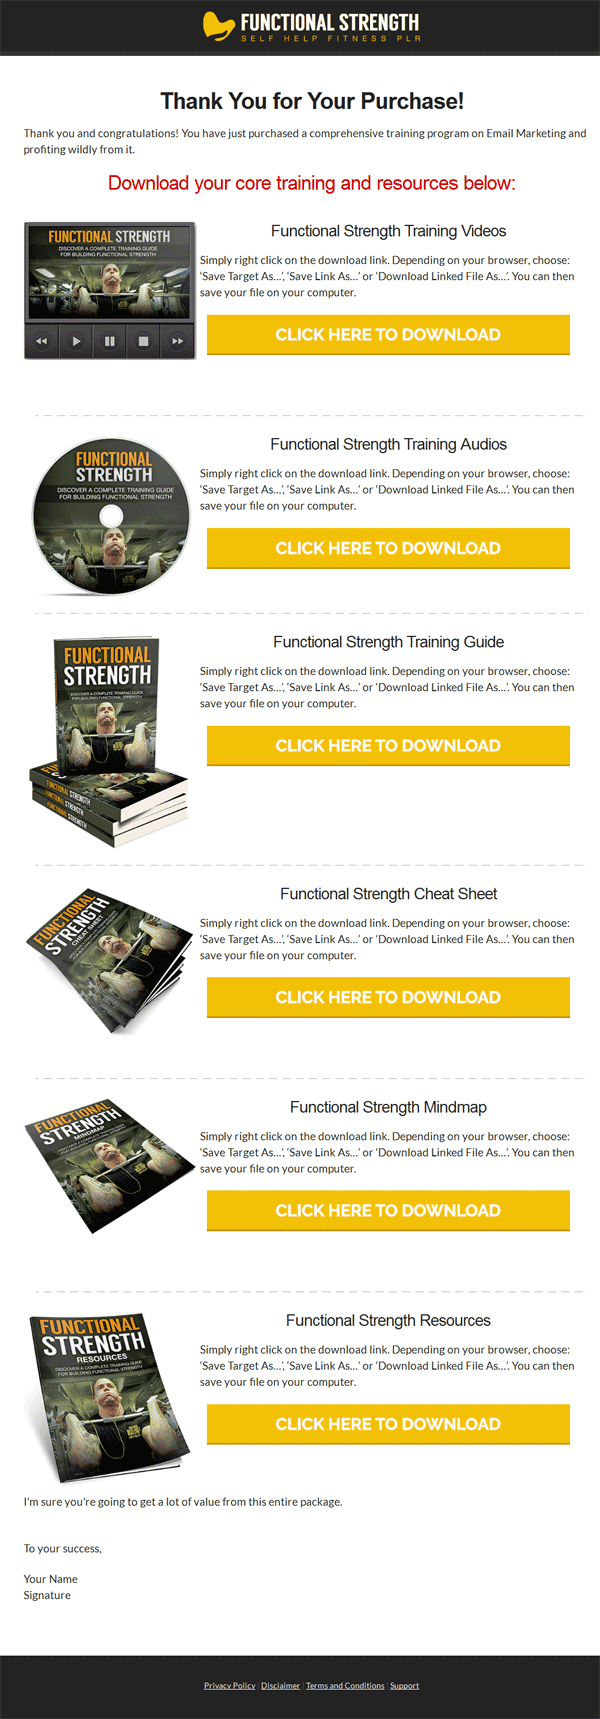 functional strength training ebook and videos